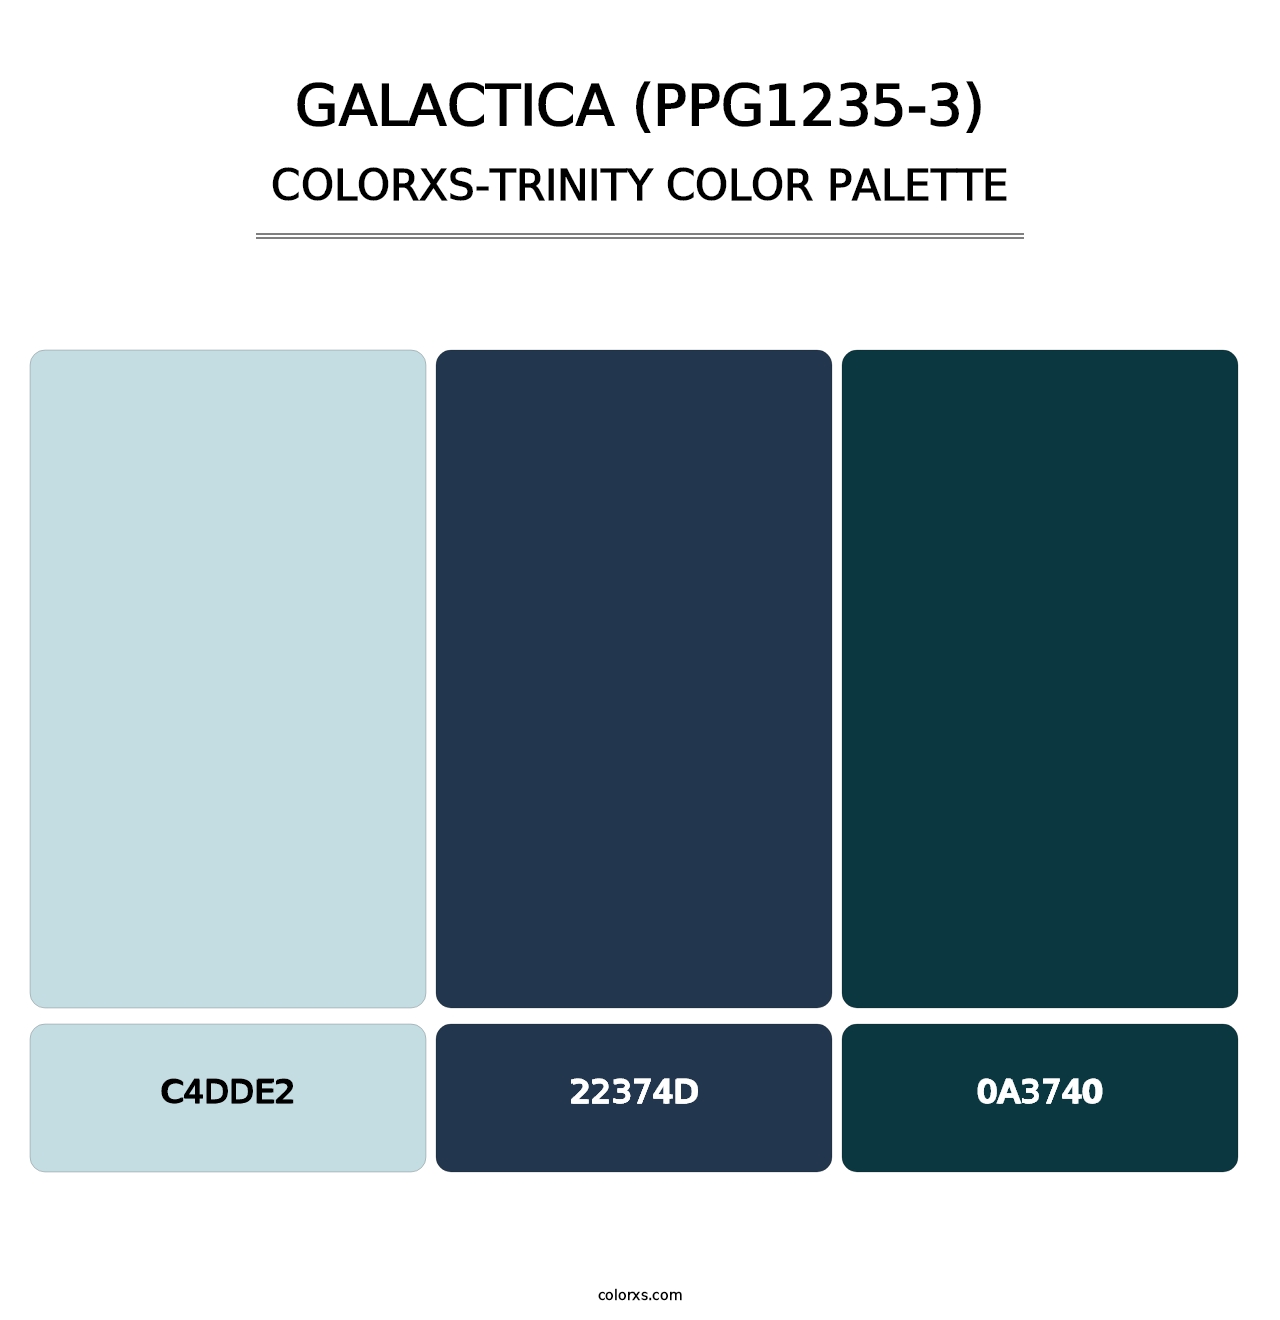 Galactica (PPG1235-3) - Colorxs Trinity Palette